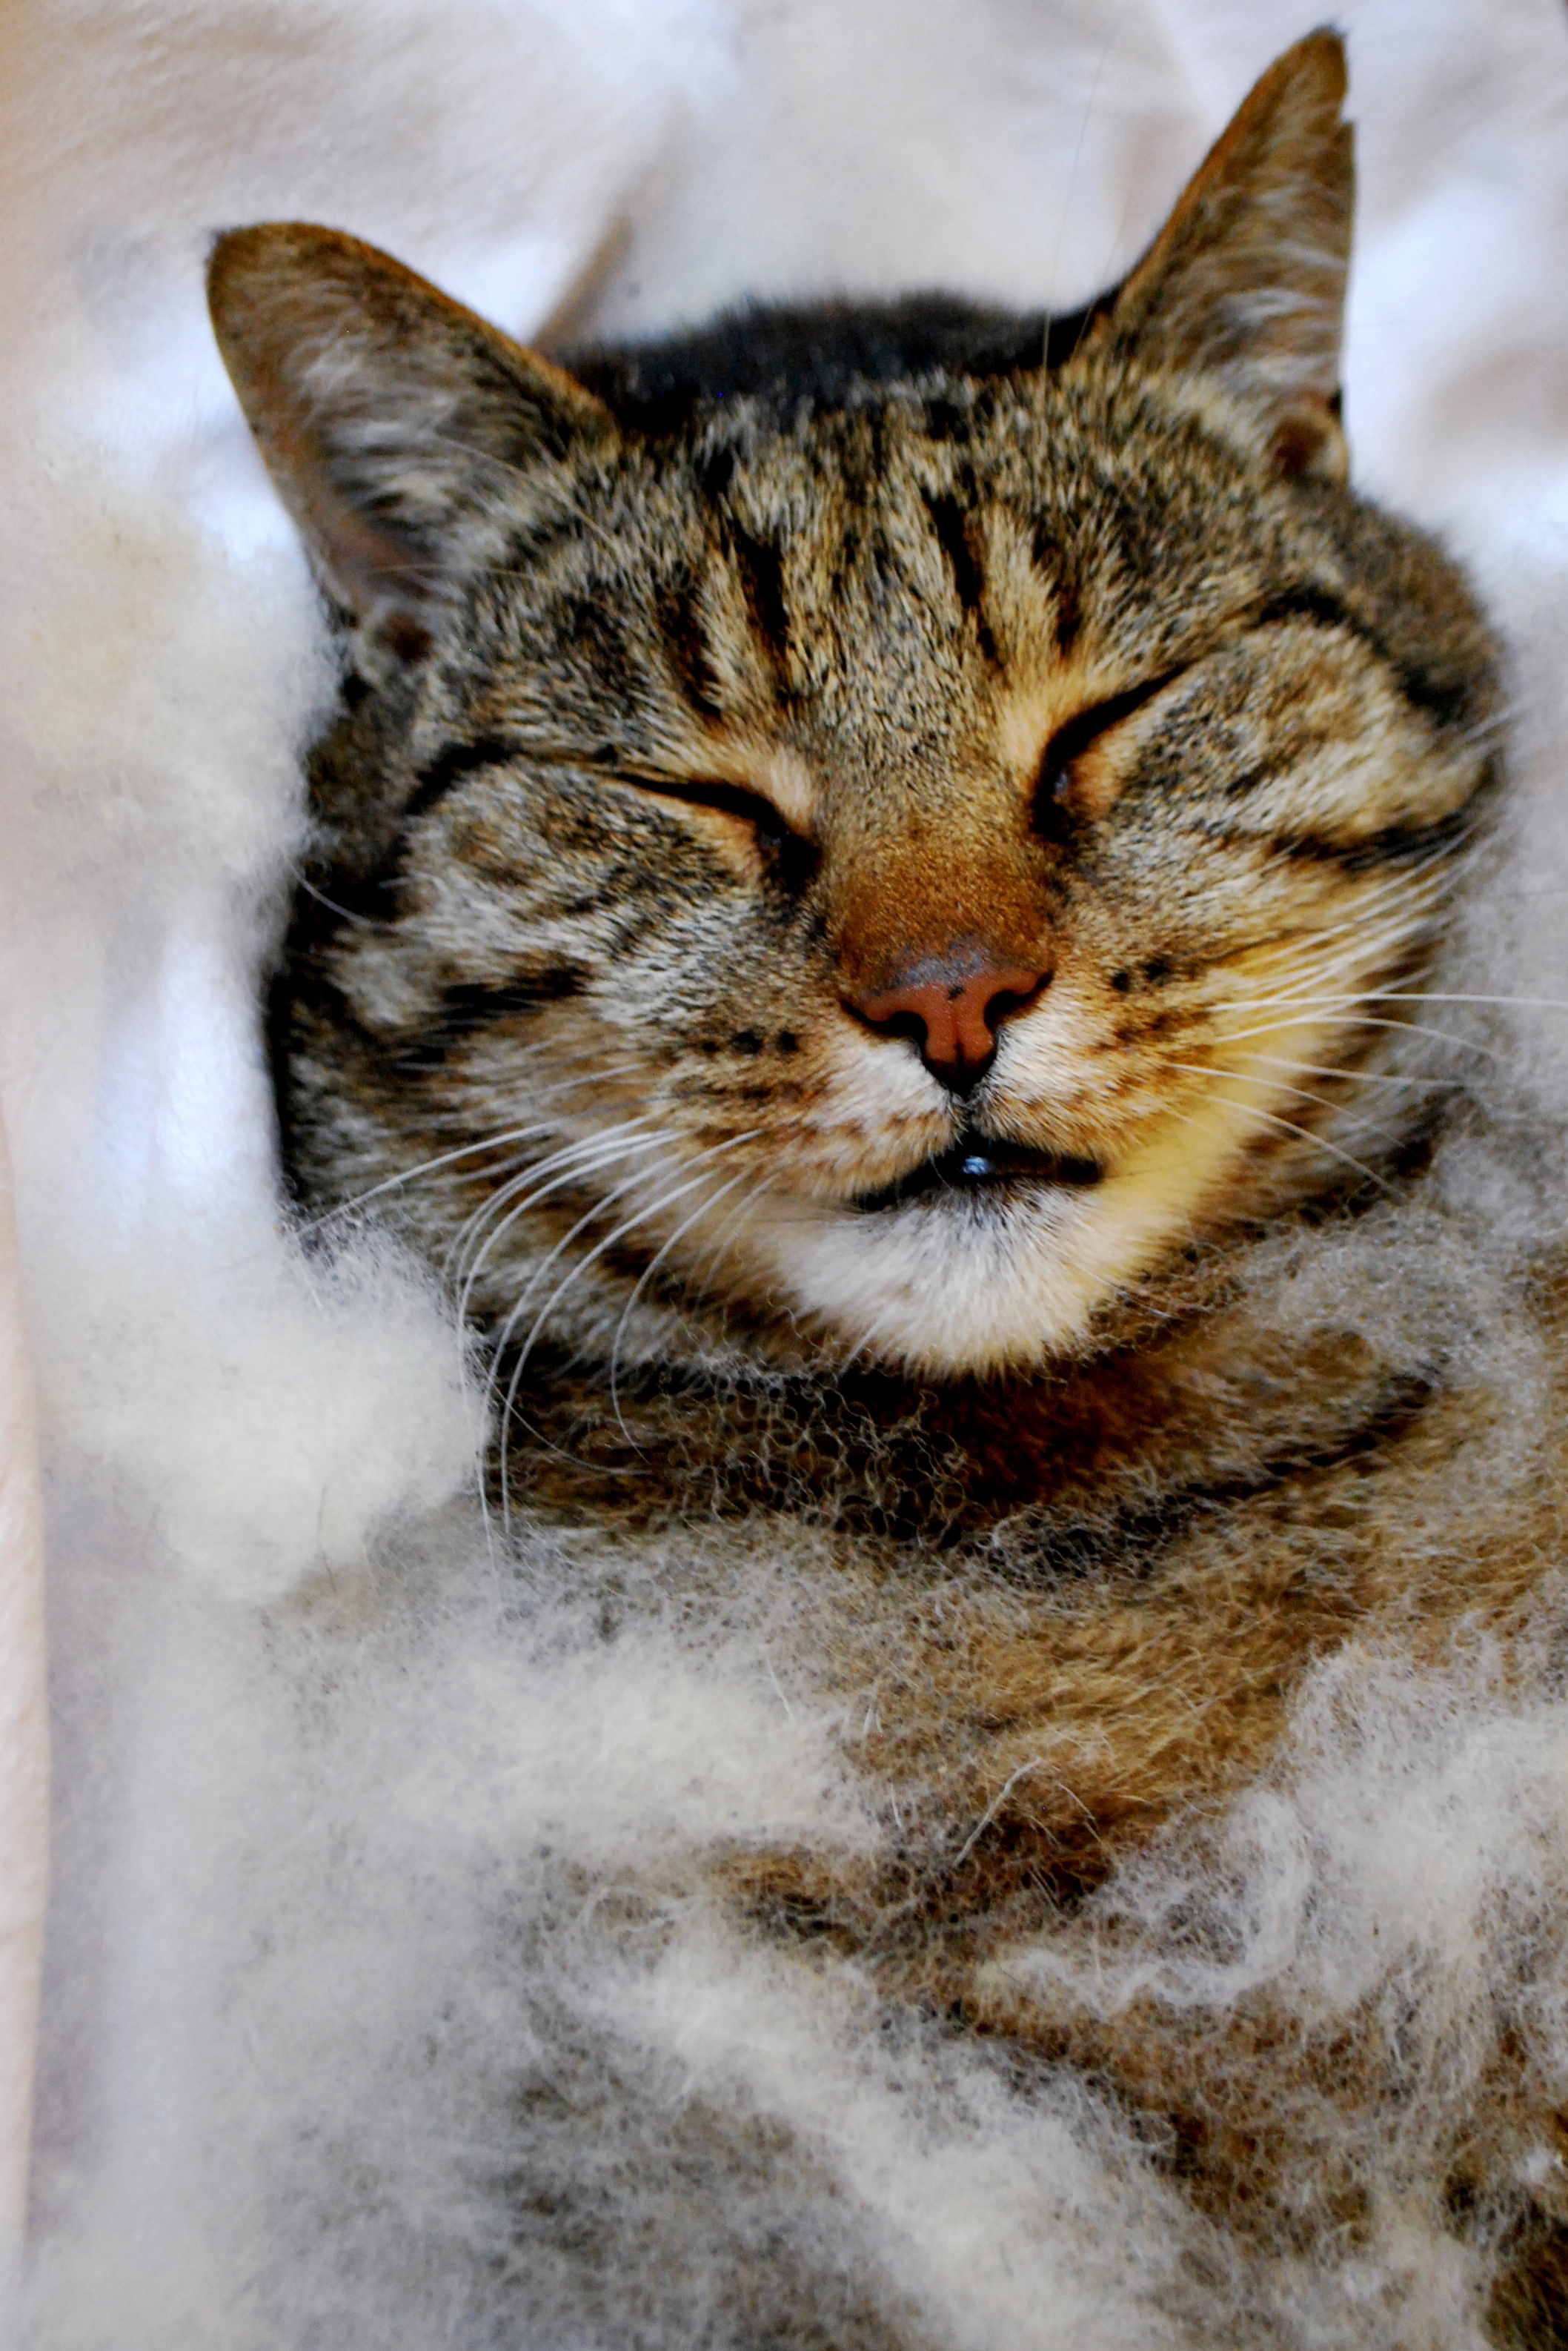 "‘Cat heaven. If you ever want to make a cat happy, just leave some fleece or knitting sitting out." – Jeni Reid